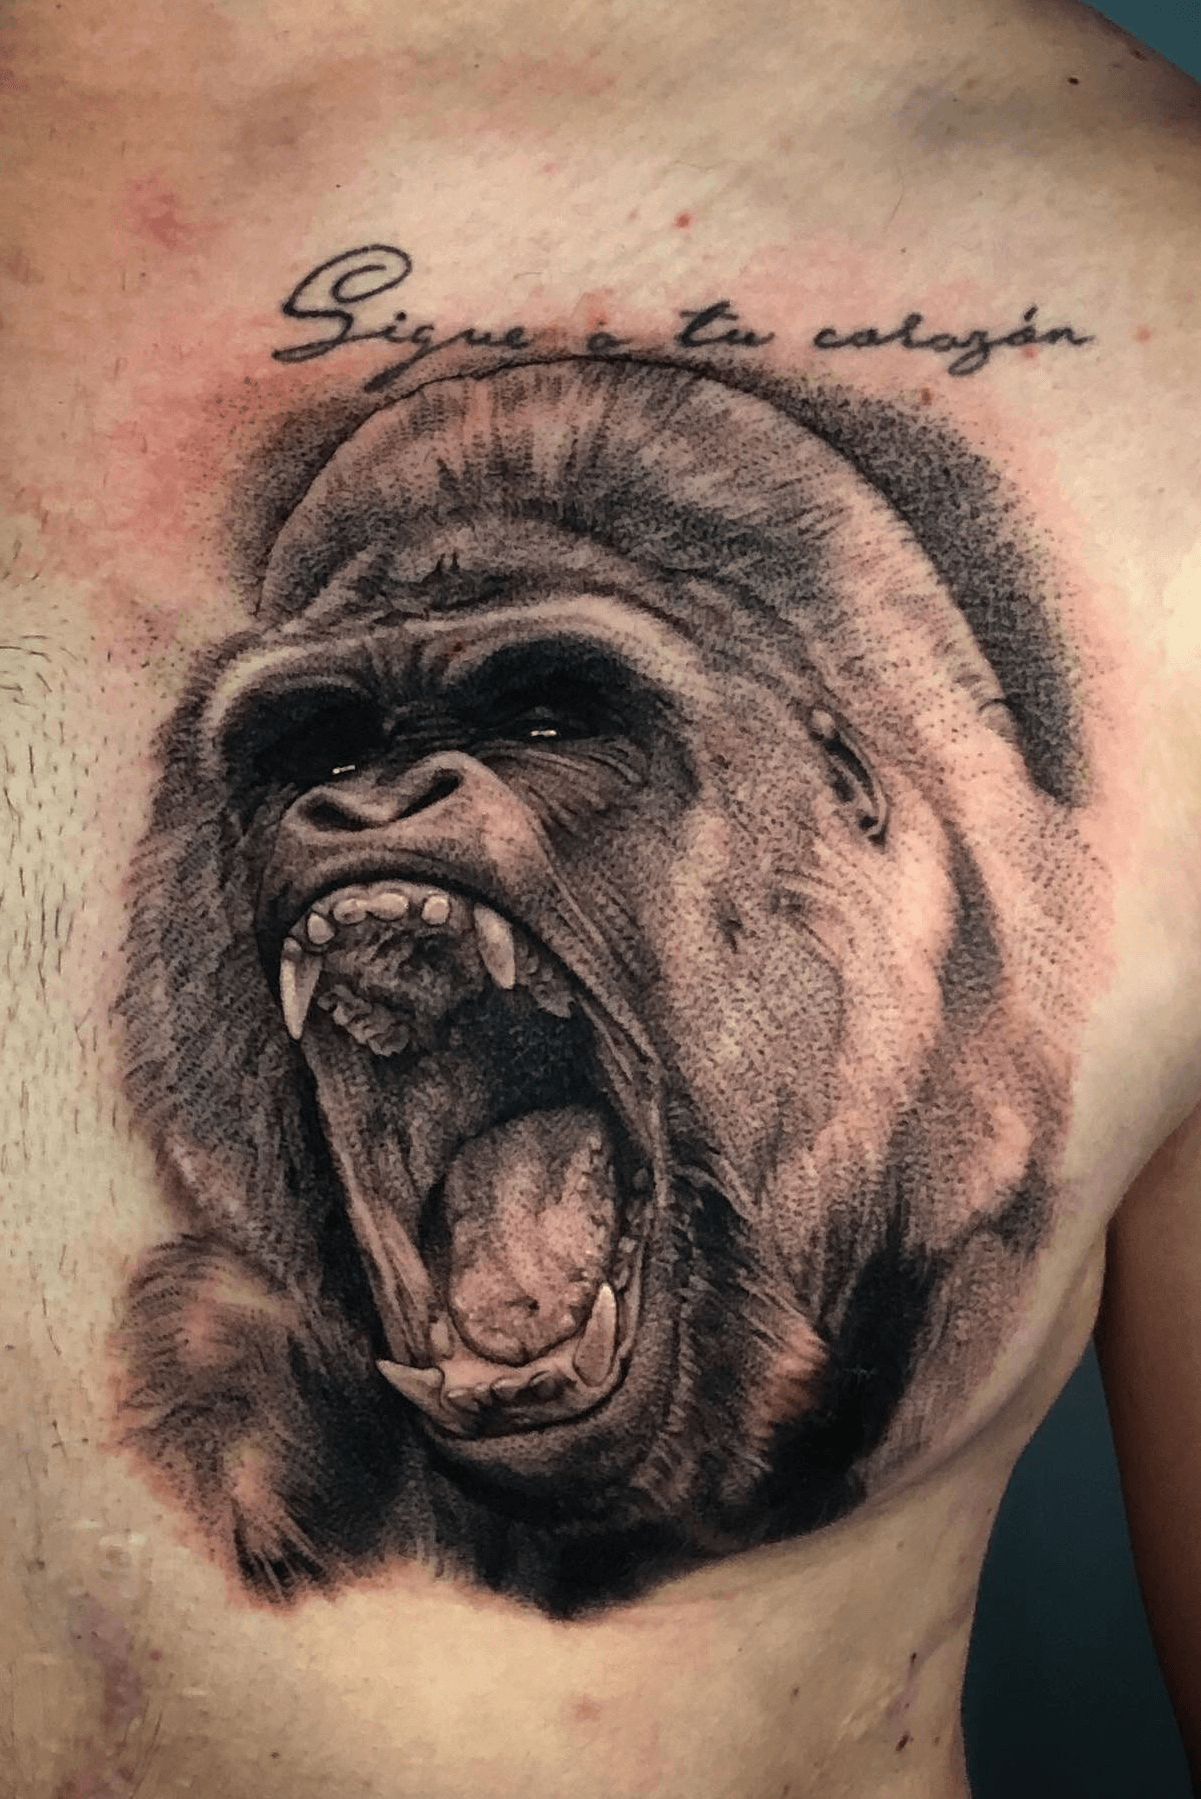 Devils Own Tattoos on Twitter Fantastic black and grey realistic style  gorilla to the chest combined with a snake in the reeds further towards  the shoulder by Thrax httpstcoAmtPmuOywh  Twitter